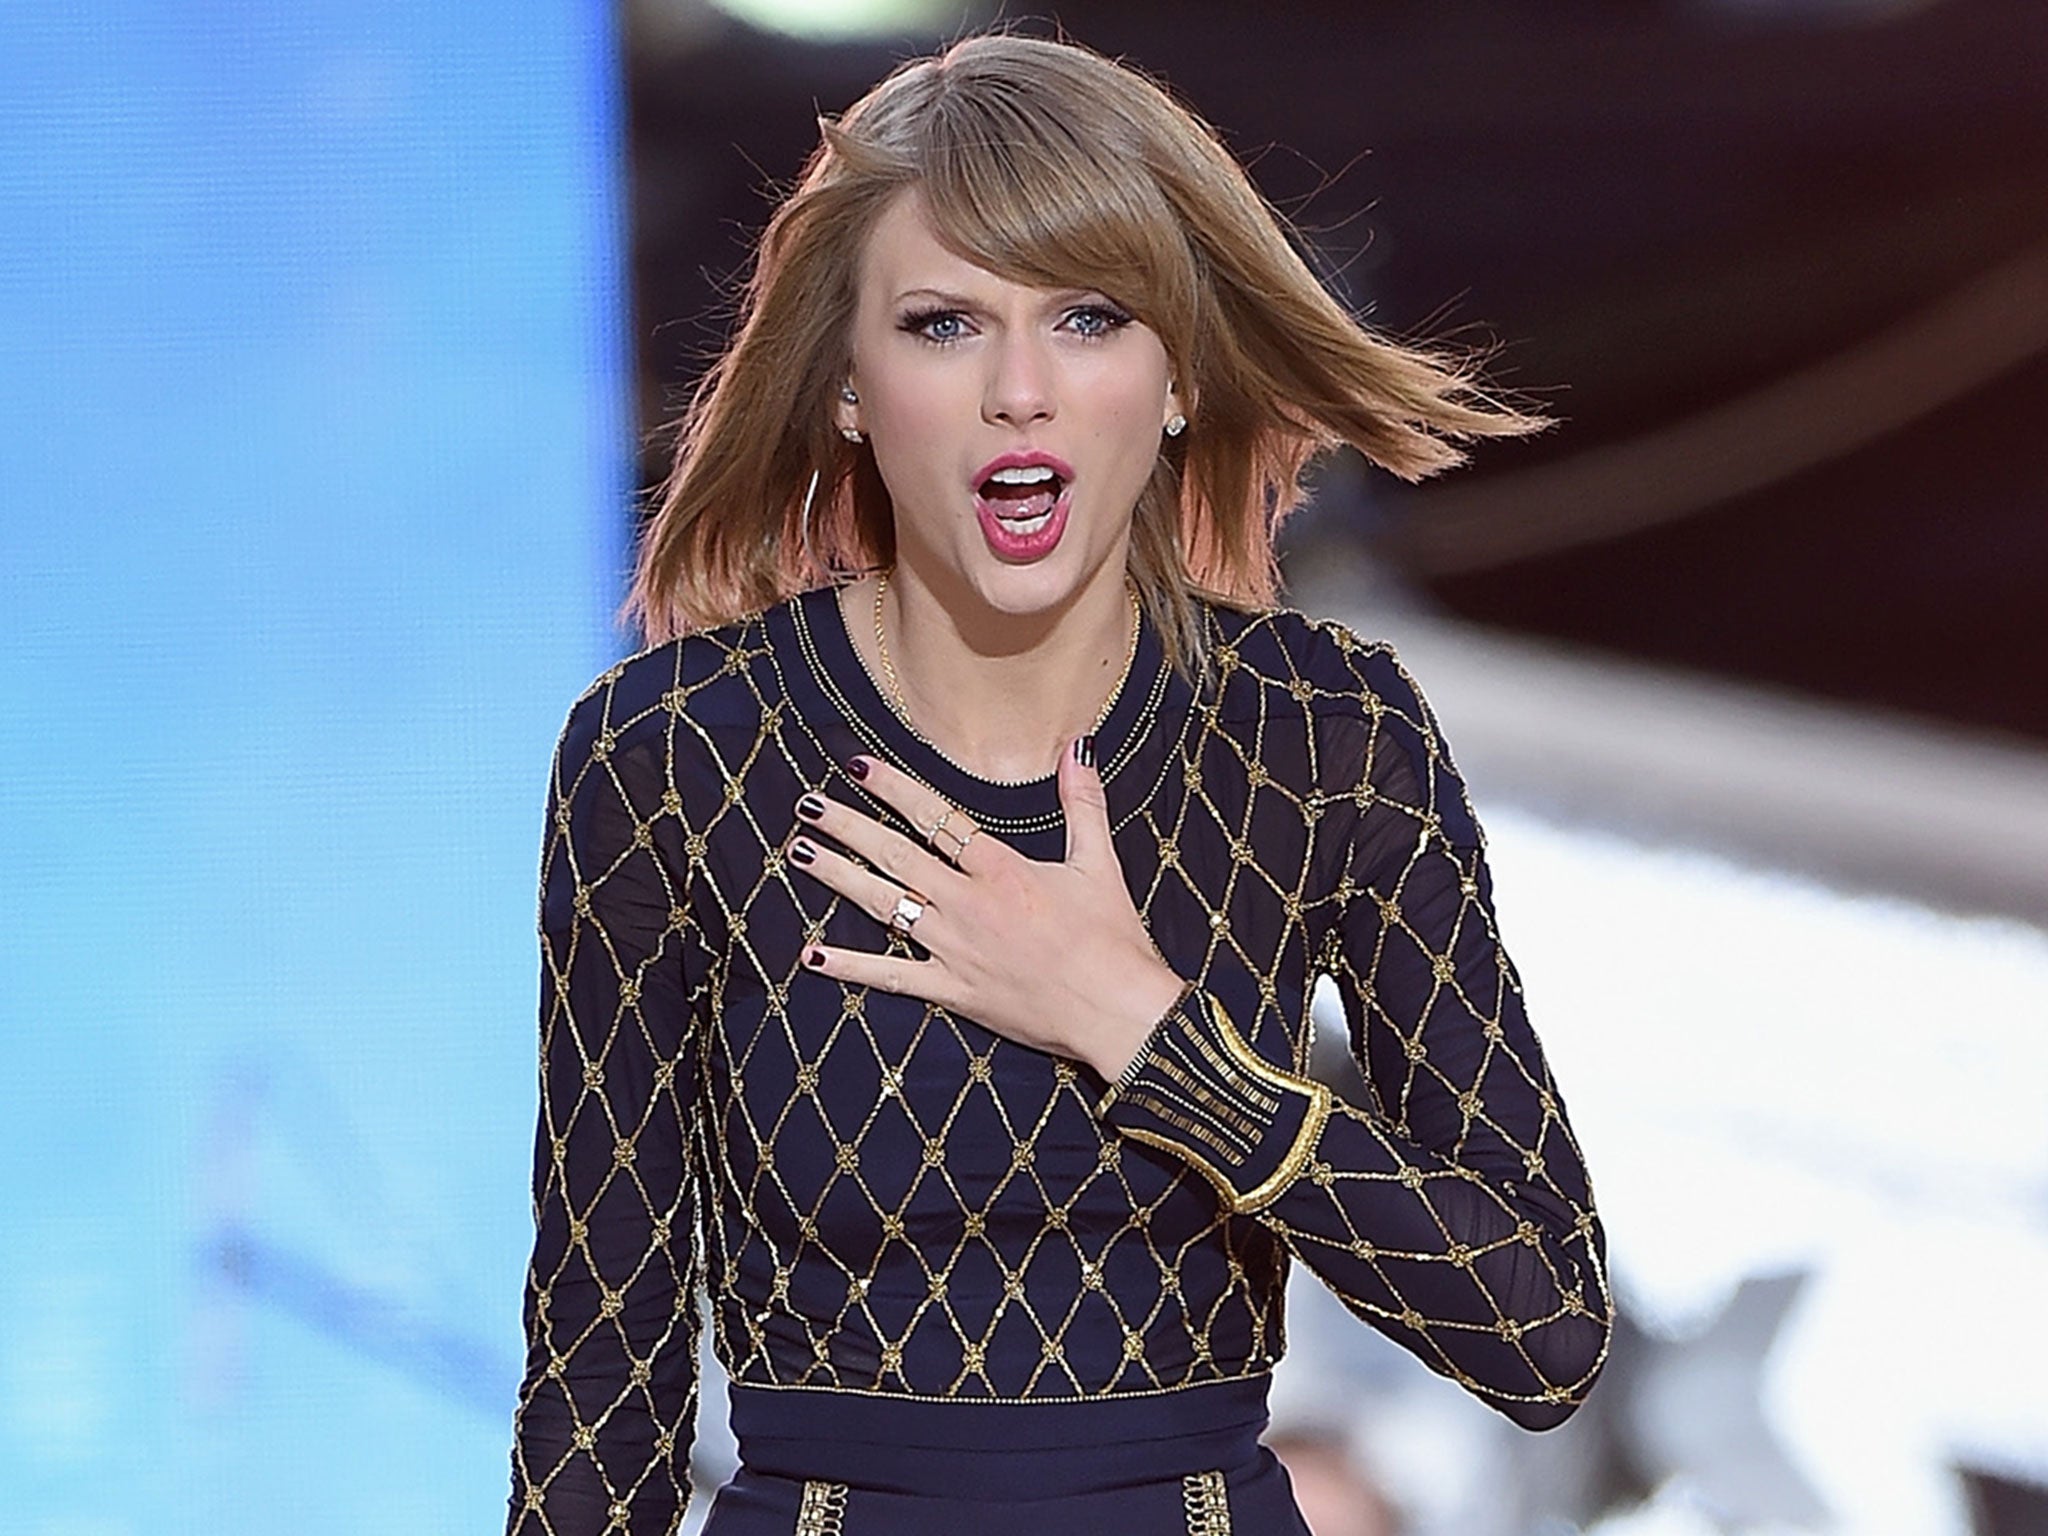 Taylor Swift Swift addressed the hack to her 51.4 million Twitter followers with a mocking tweet